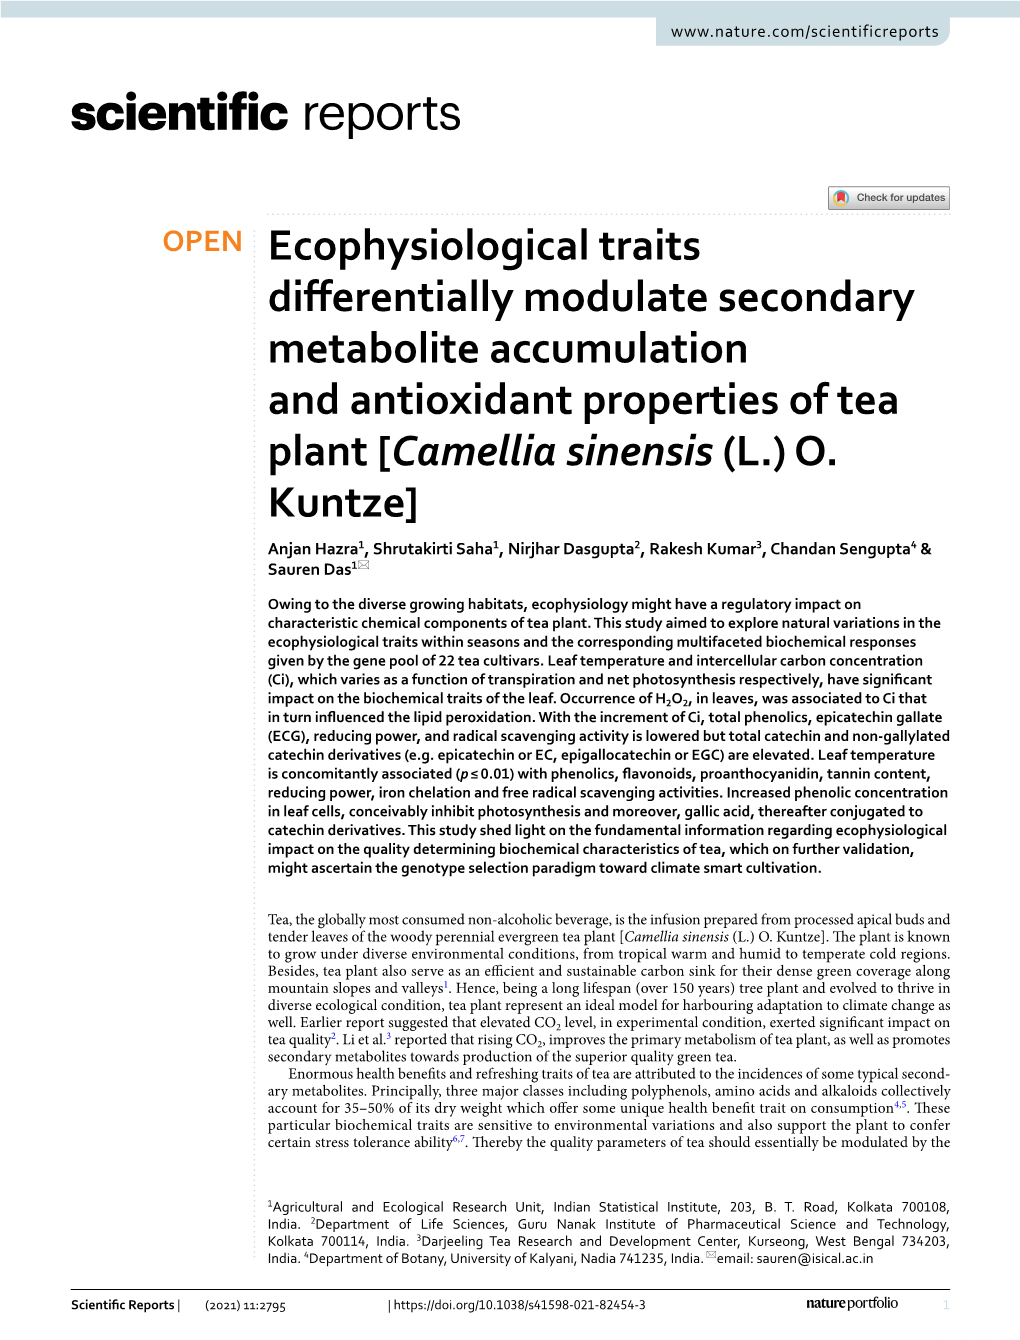 Ecophysiological Traits Differentially Modulate Secondary Metabolite